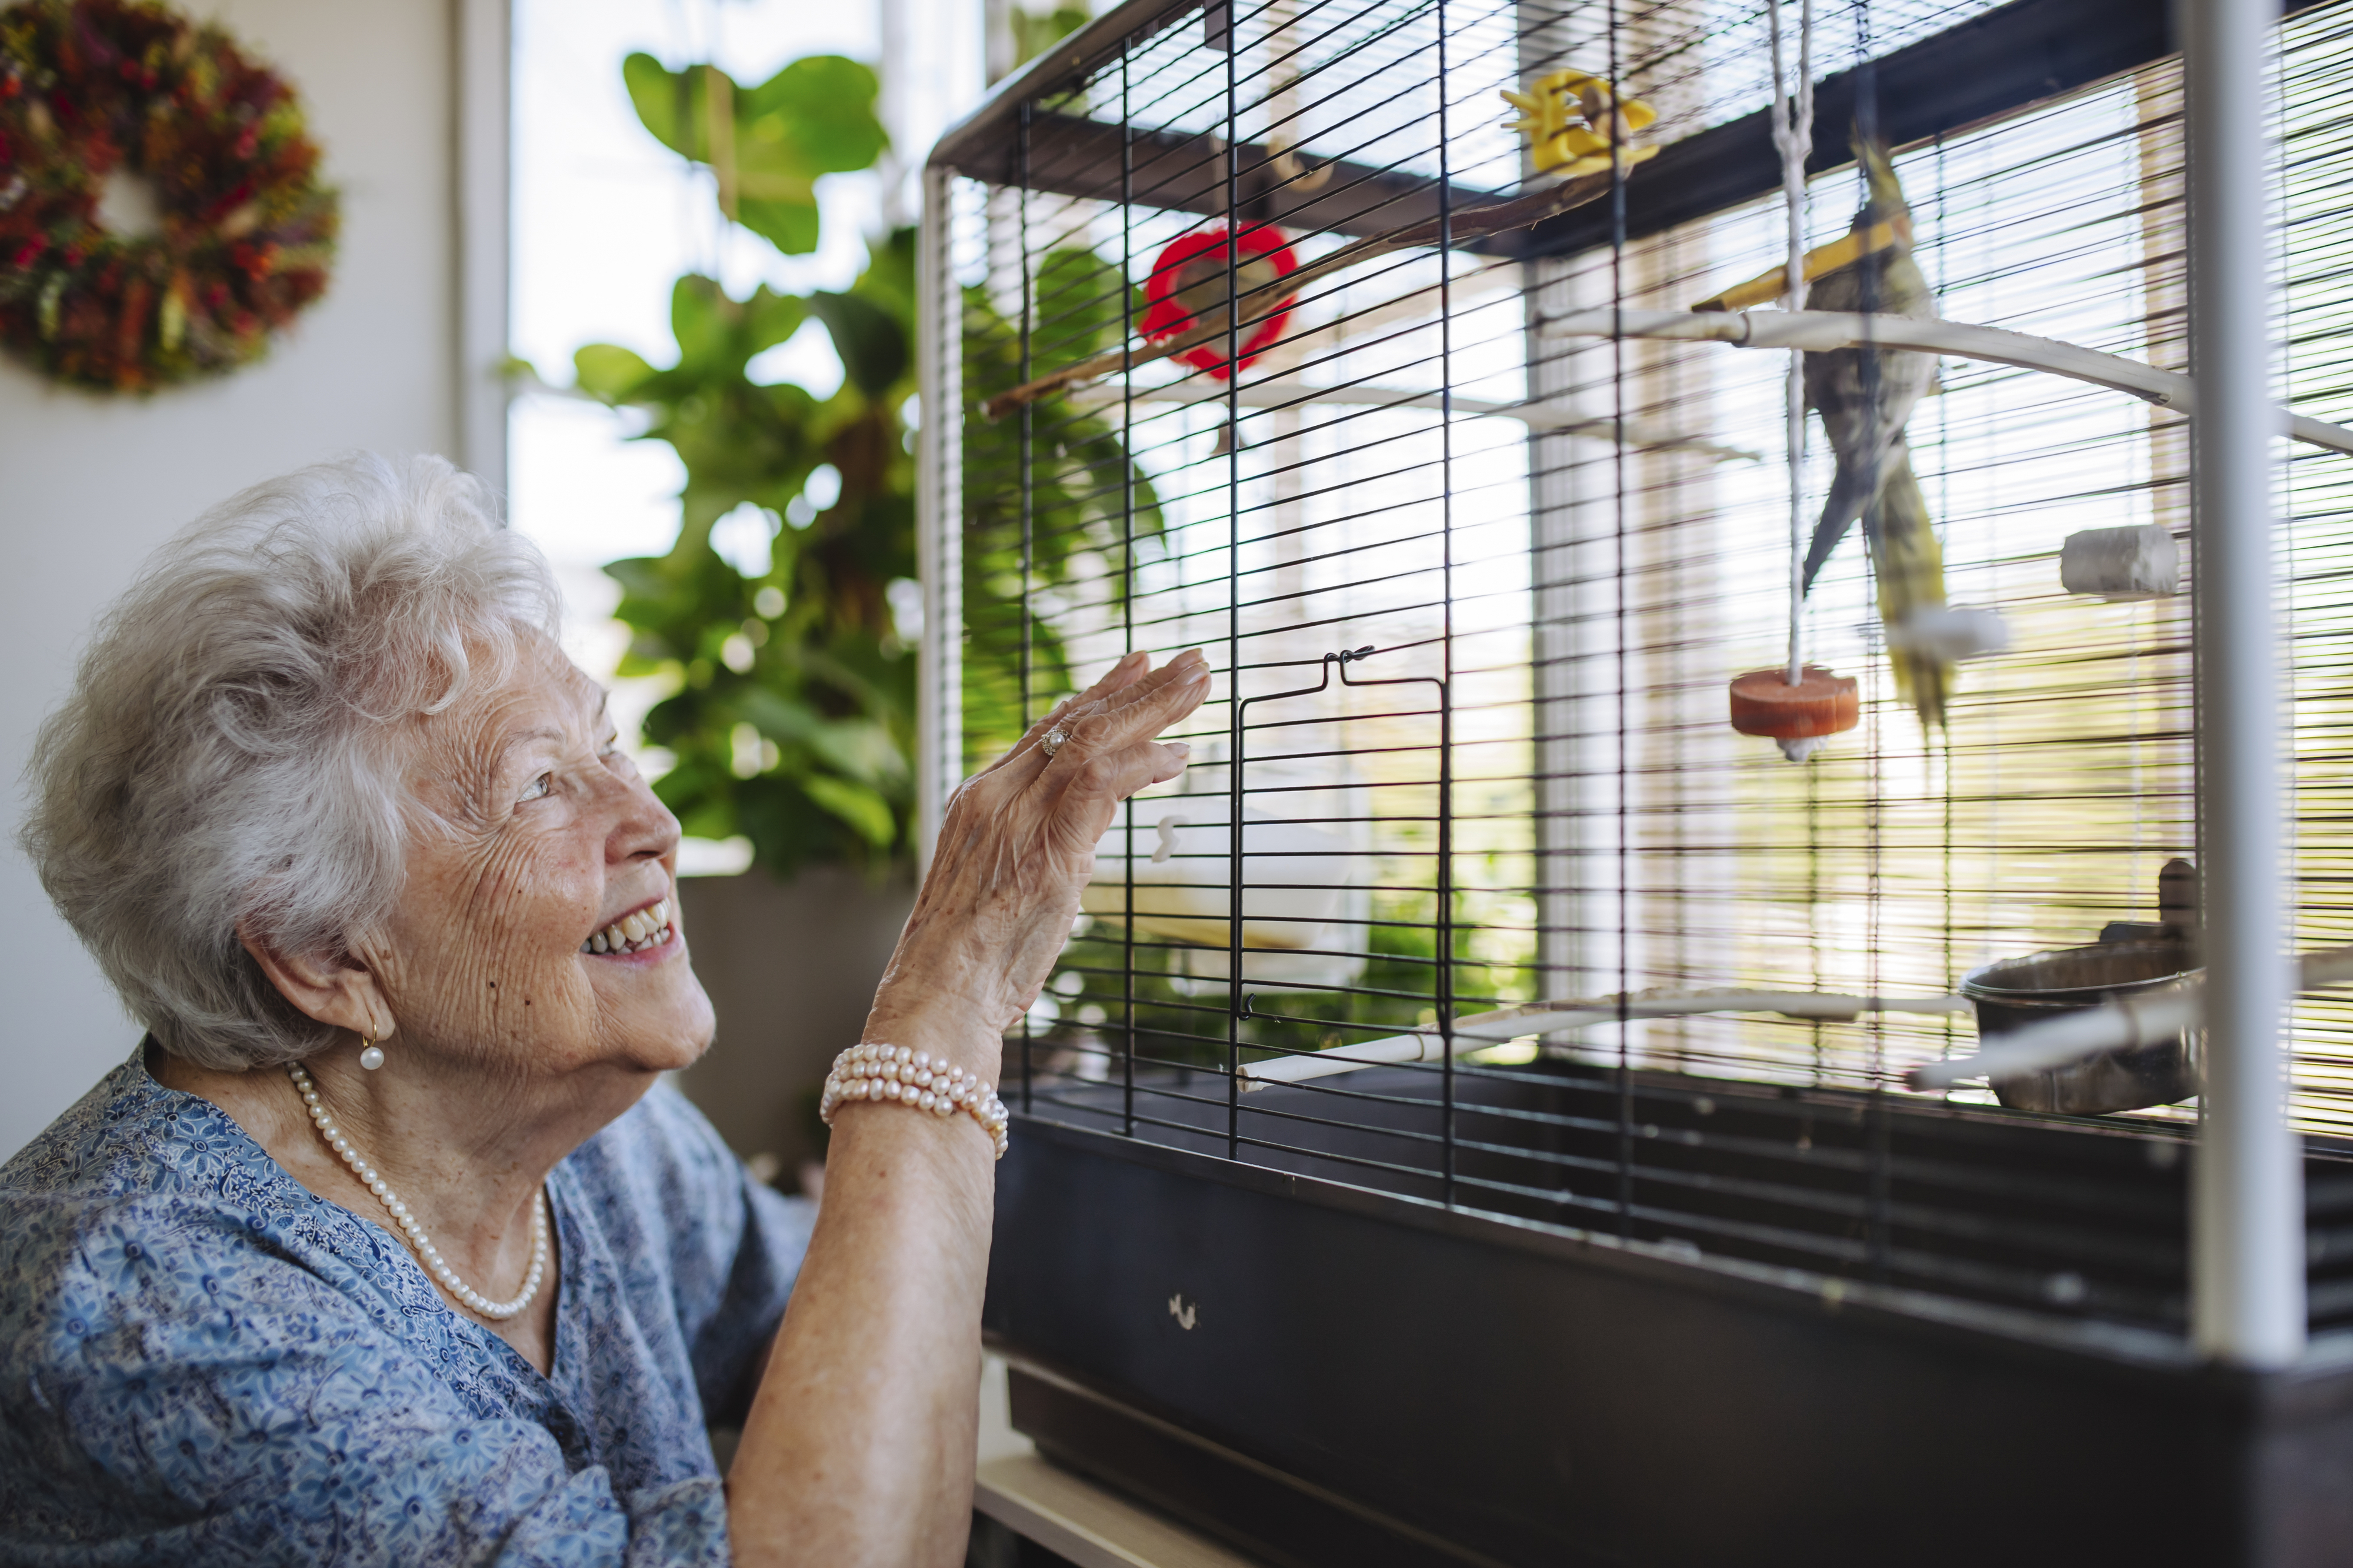 Elderly woman smiling, interacting with a bird inside a cage